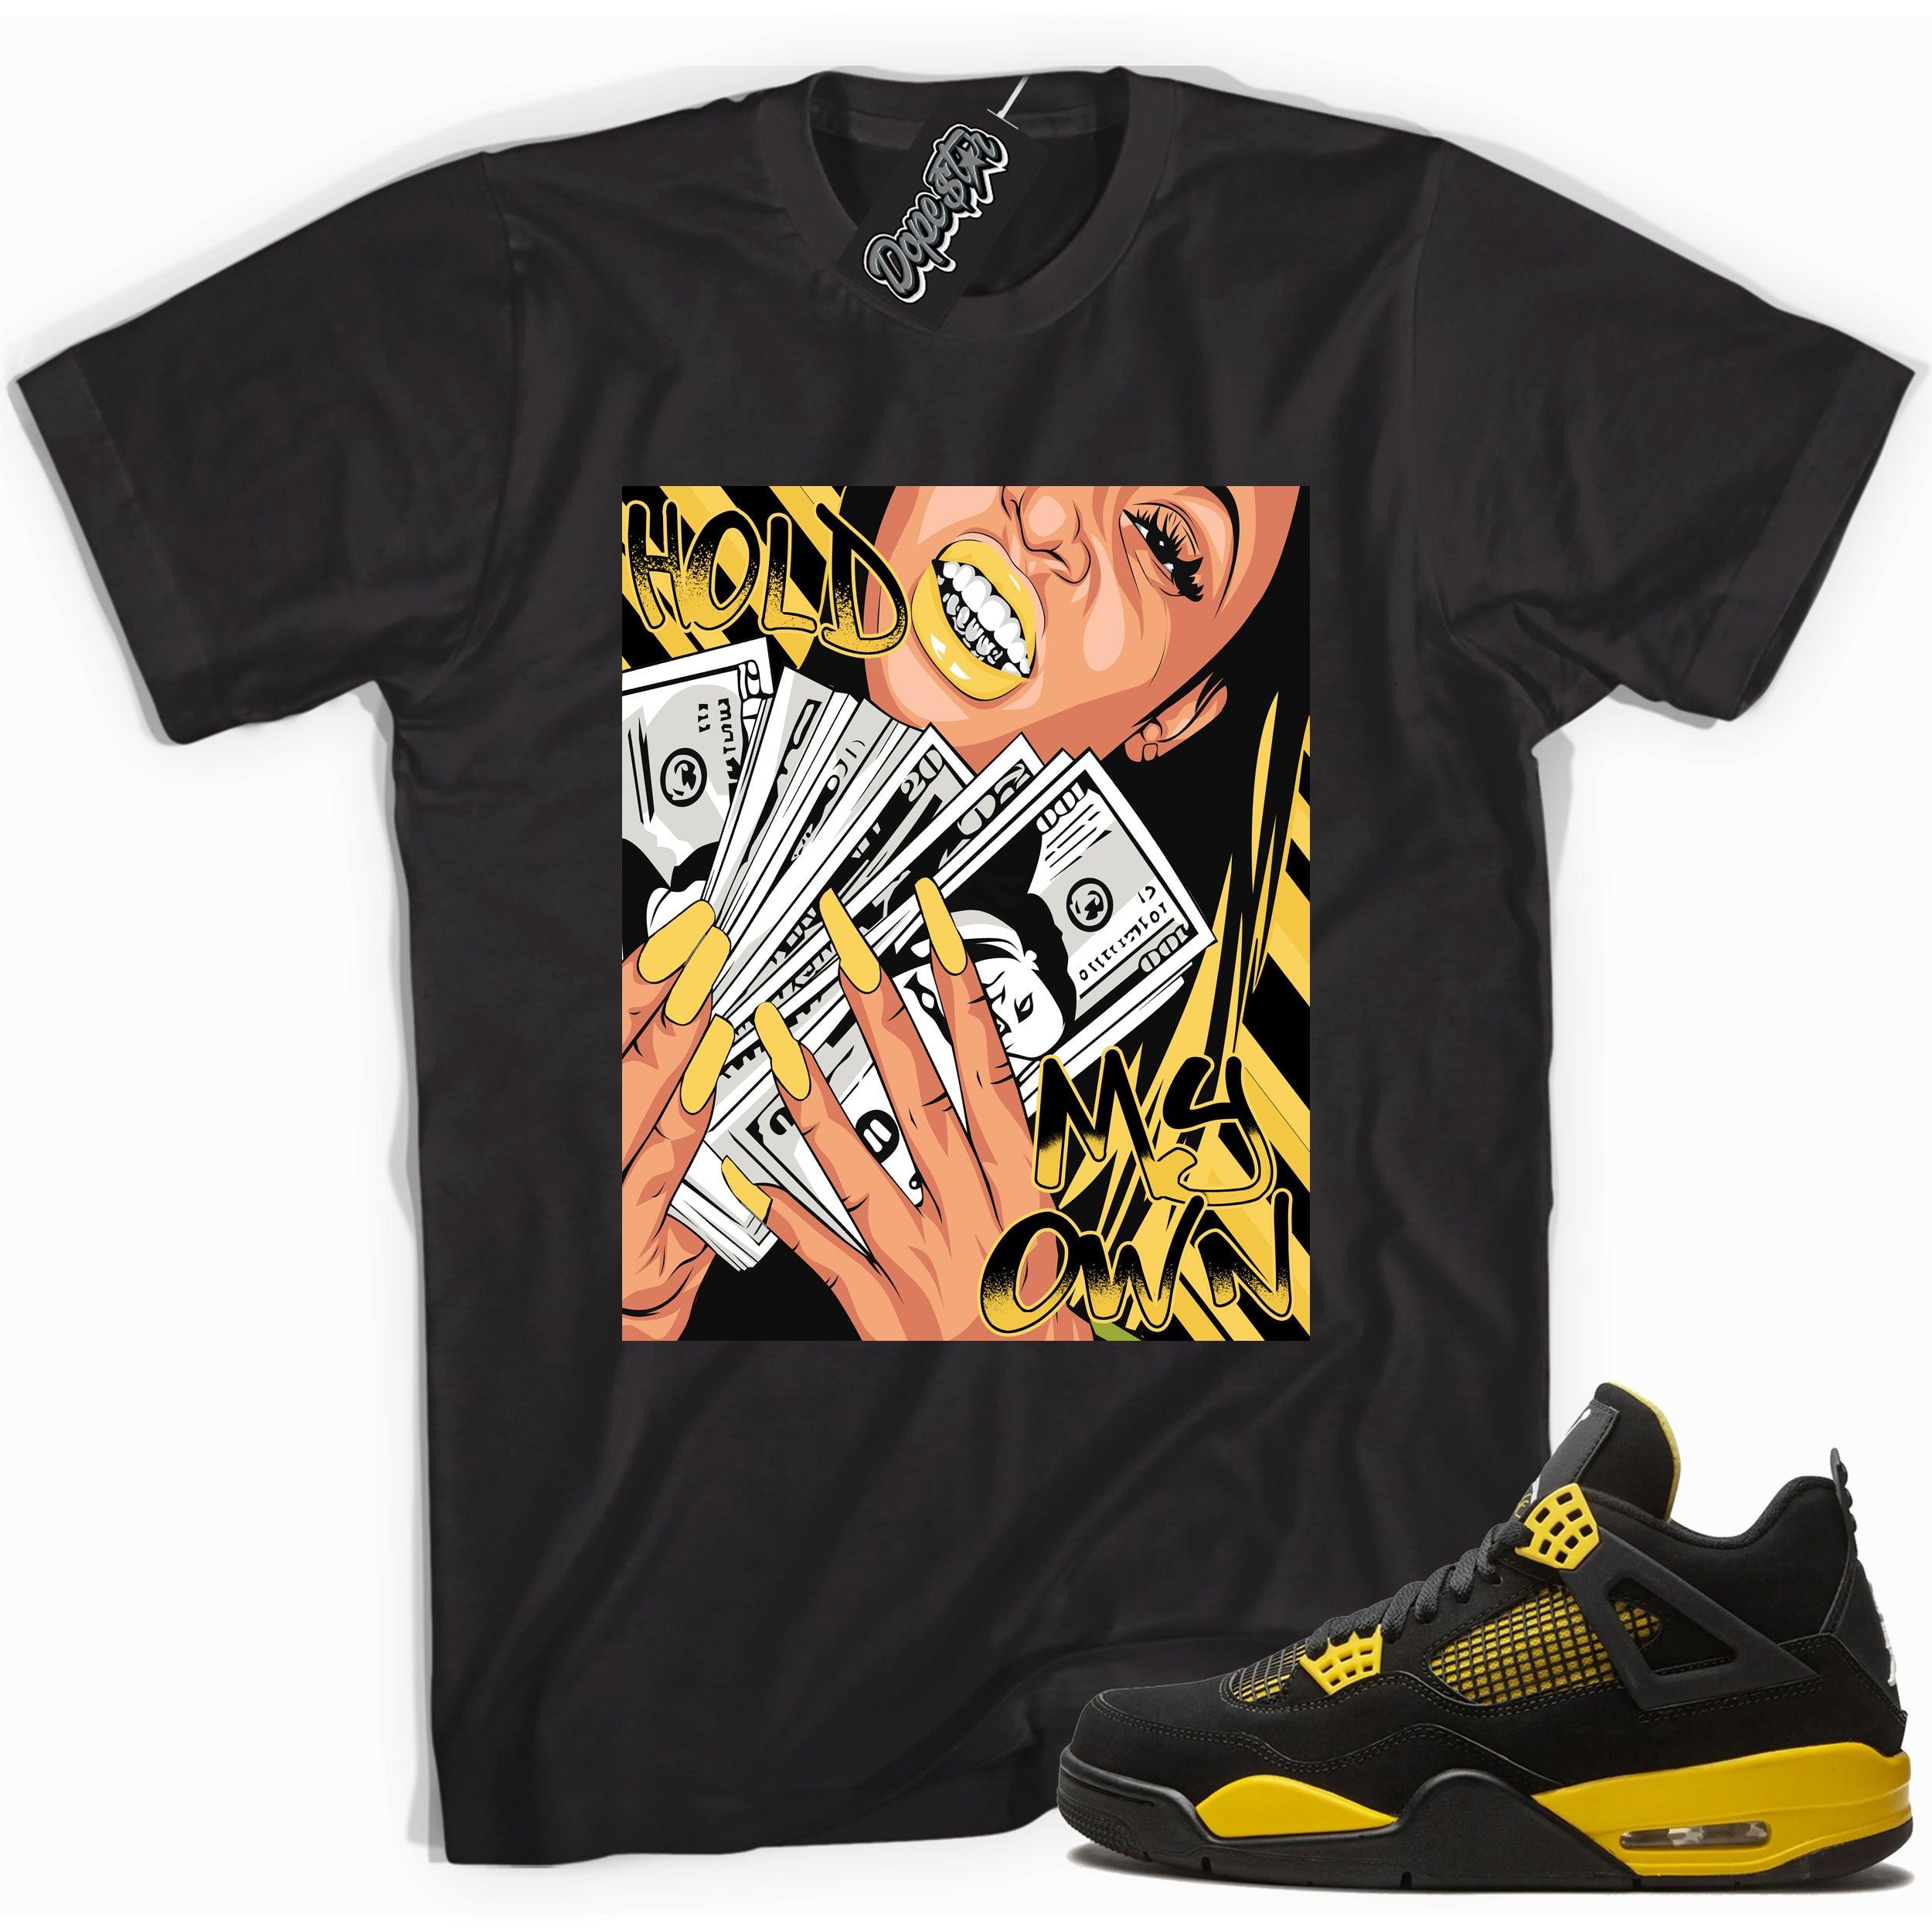 Cool black graphic tee with 'hold my own' print, that perfectly matches  Air Jordan 4 Thunder sneakers